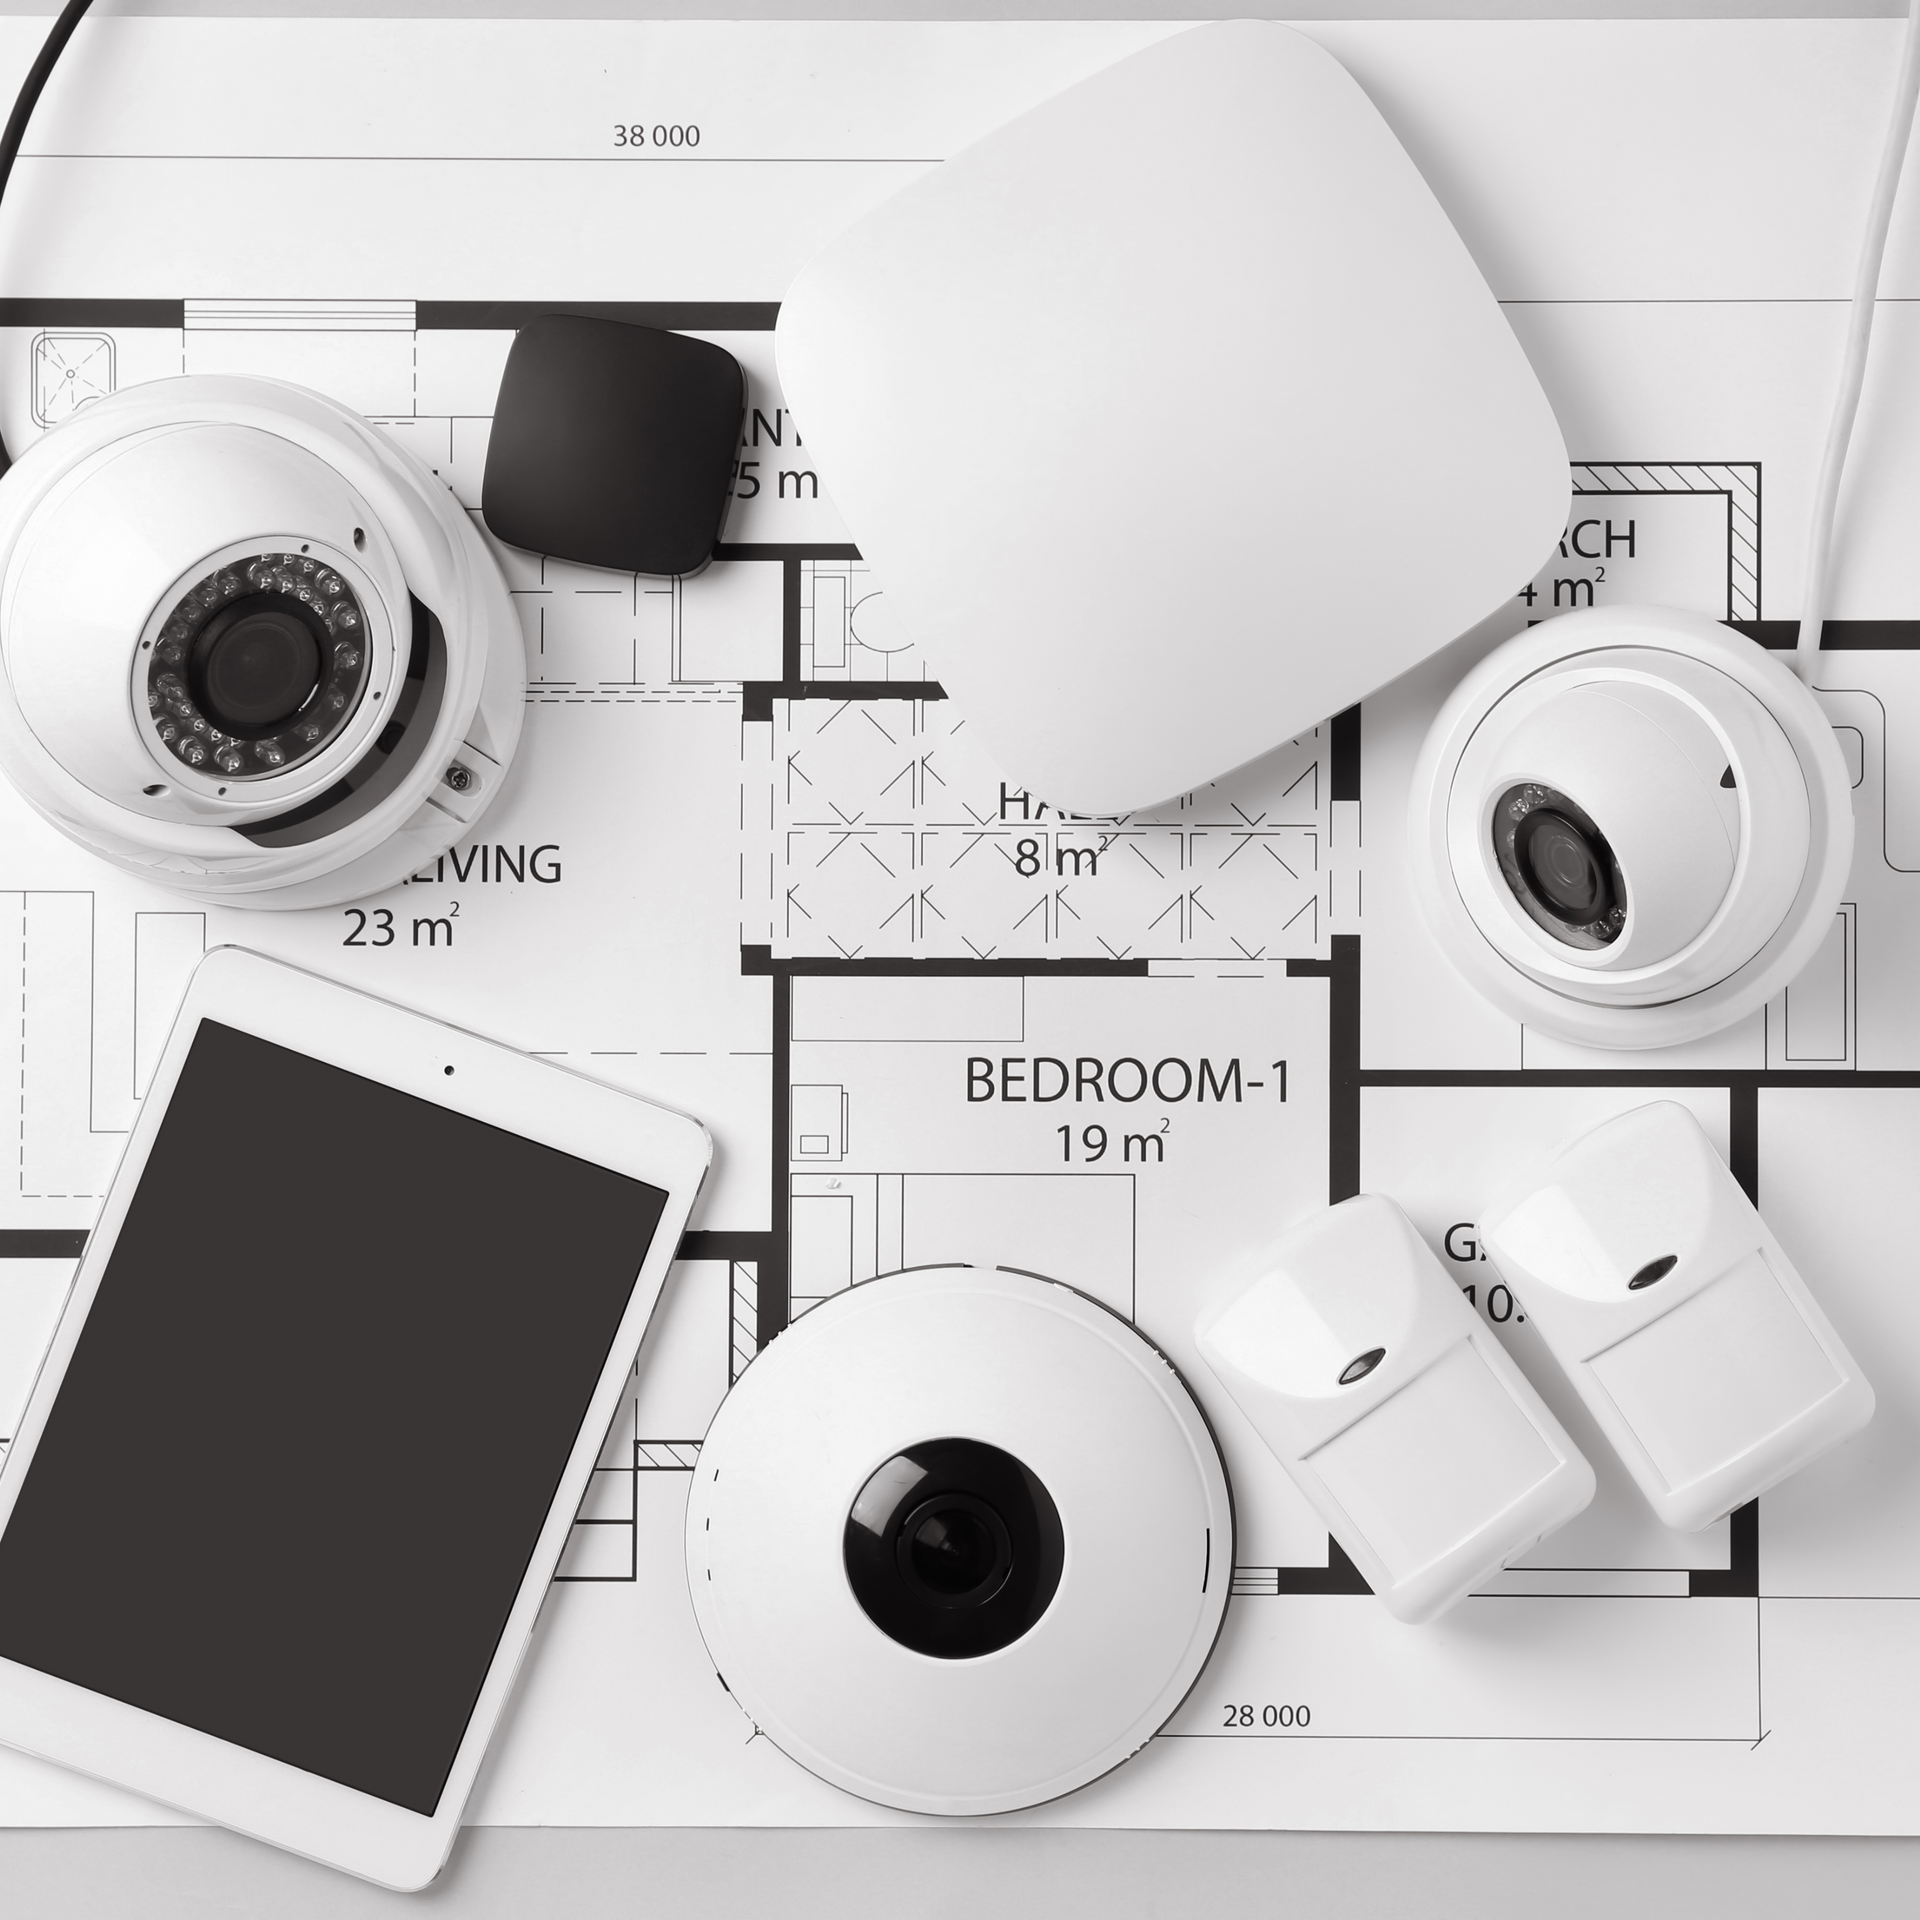 A bunch of security cameras are sitting on top of a floor plan.